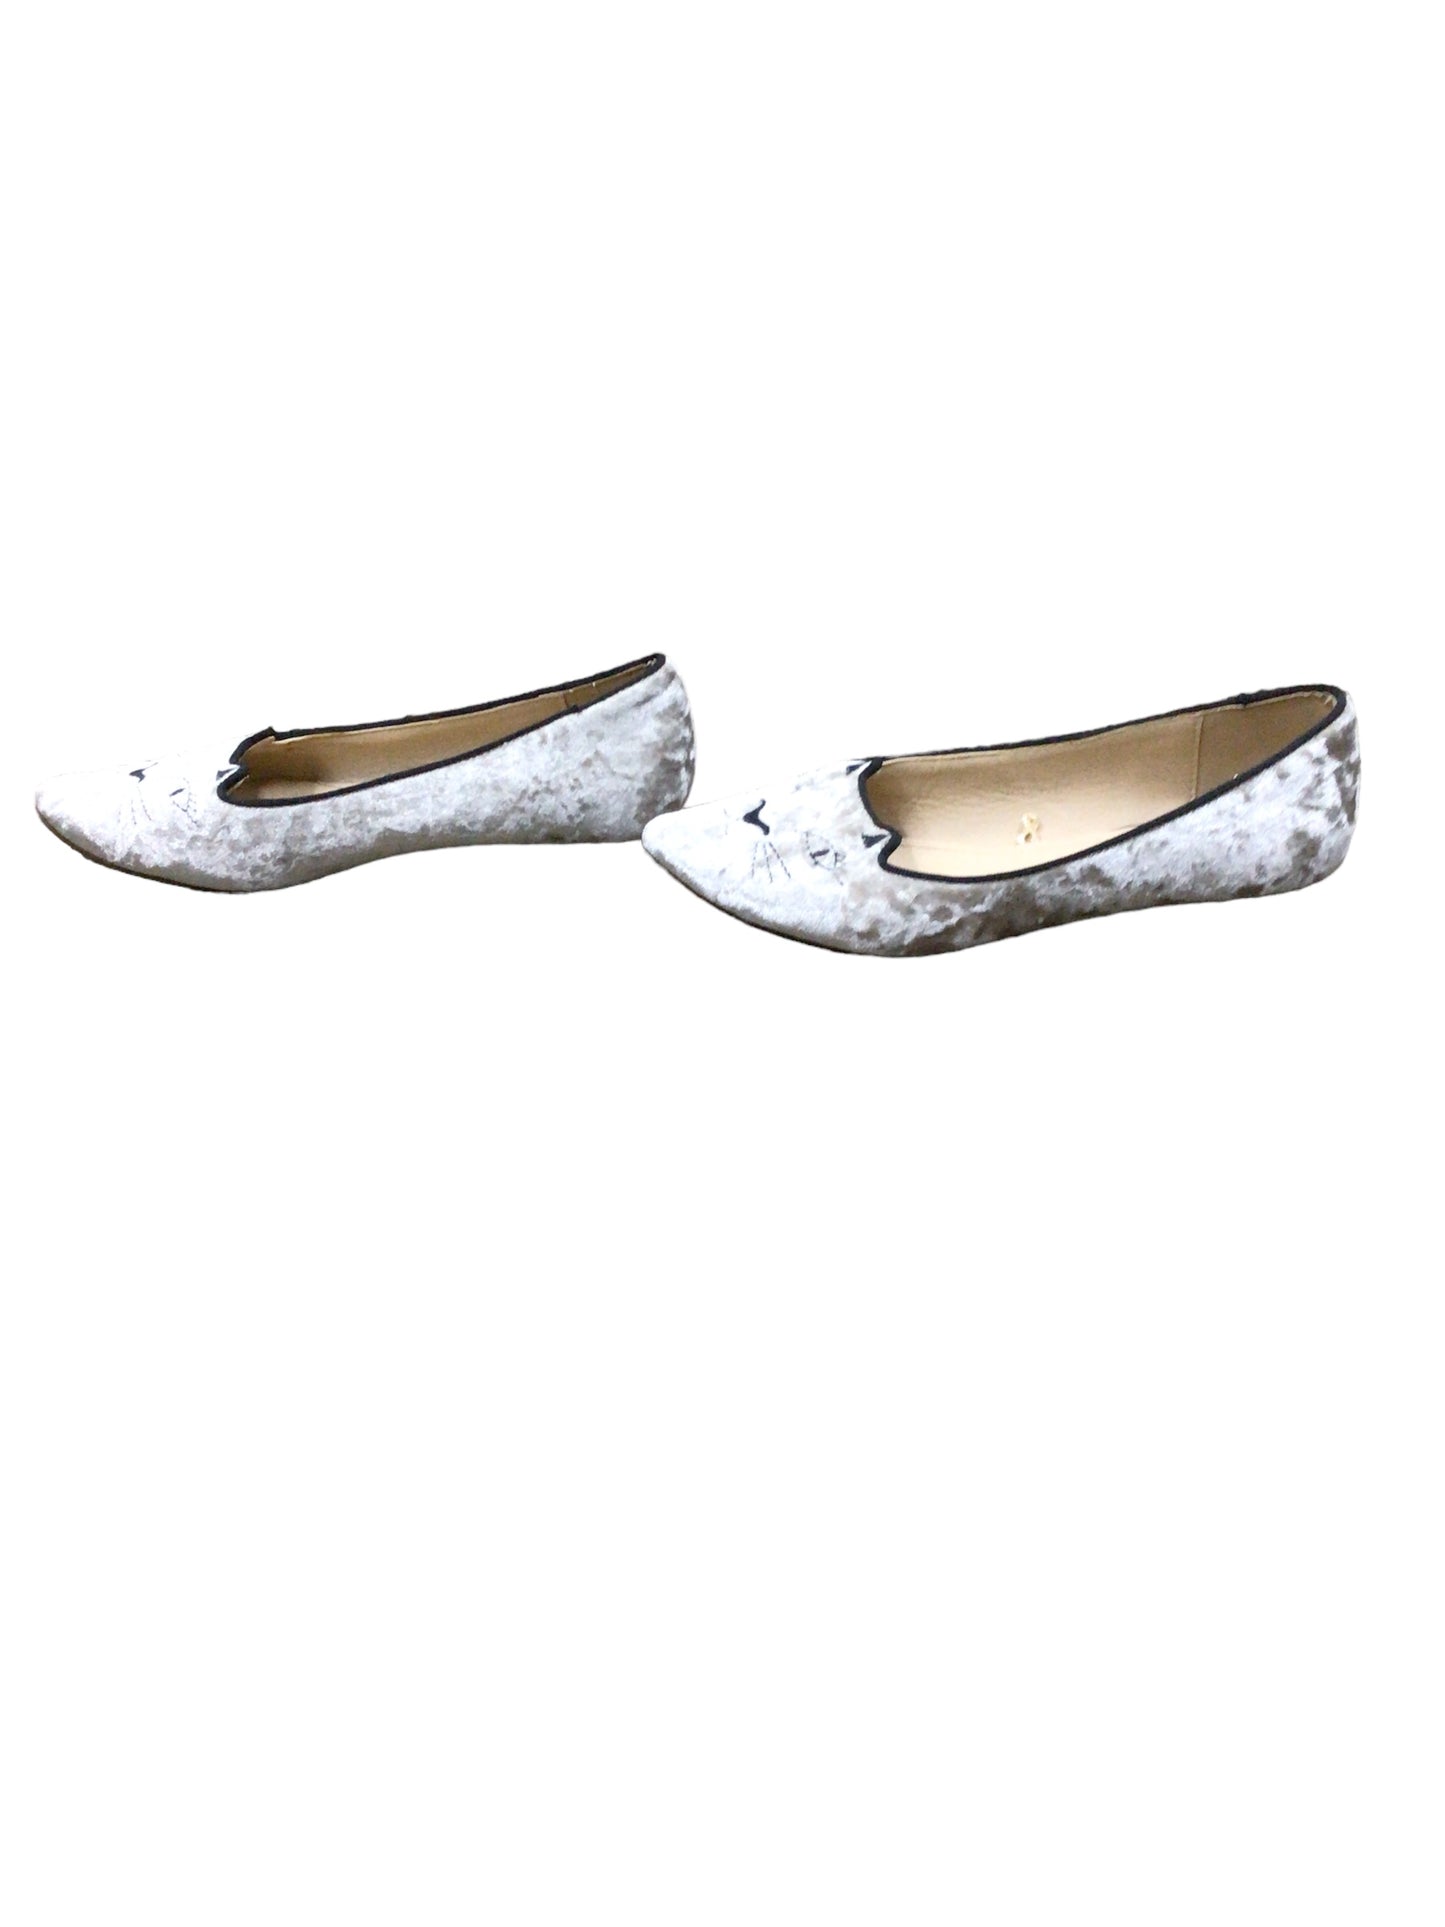 Shoes Flats Loafer Oxford By Cme  Size: 7